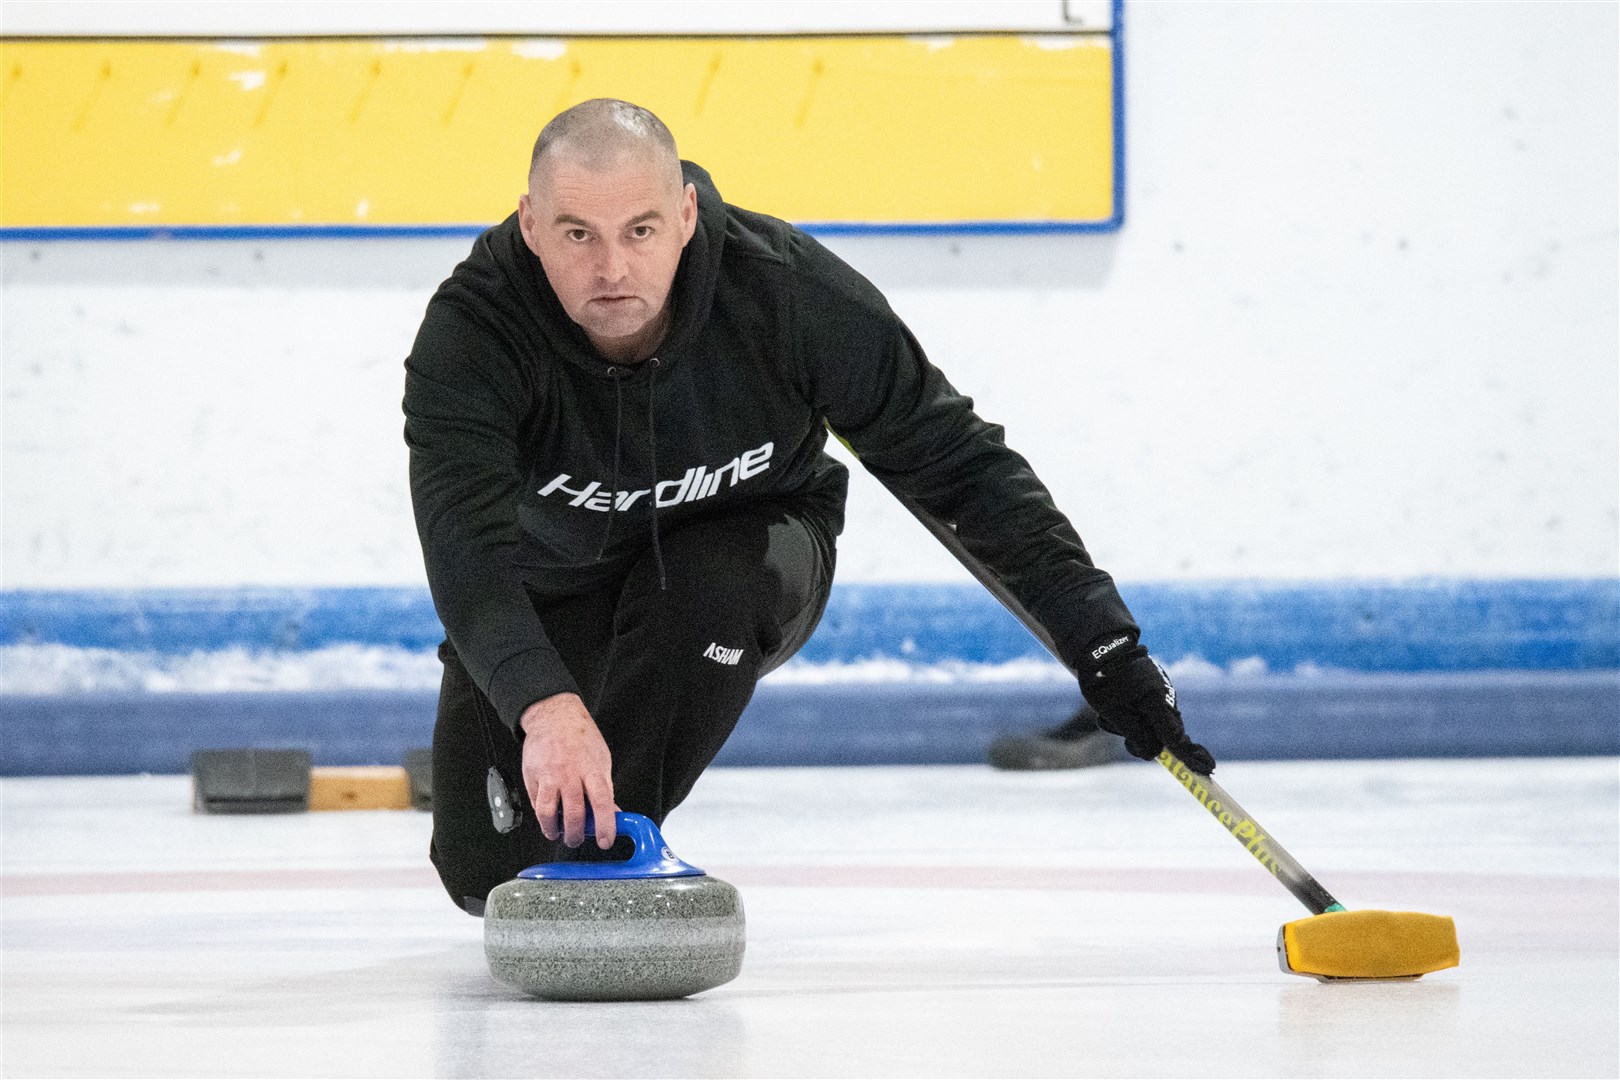 Event organiser Andy Cameron. 14th annual Moray International Bonspiel - held at Moray Leisure Centre. Picture: Daniel Forsyth.